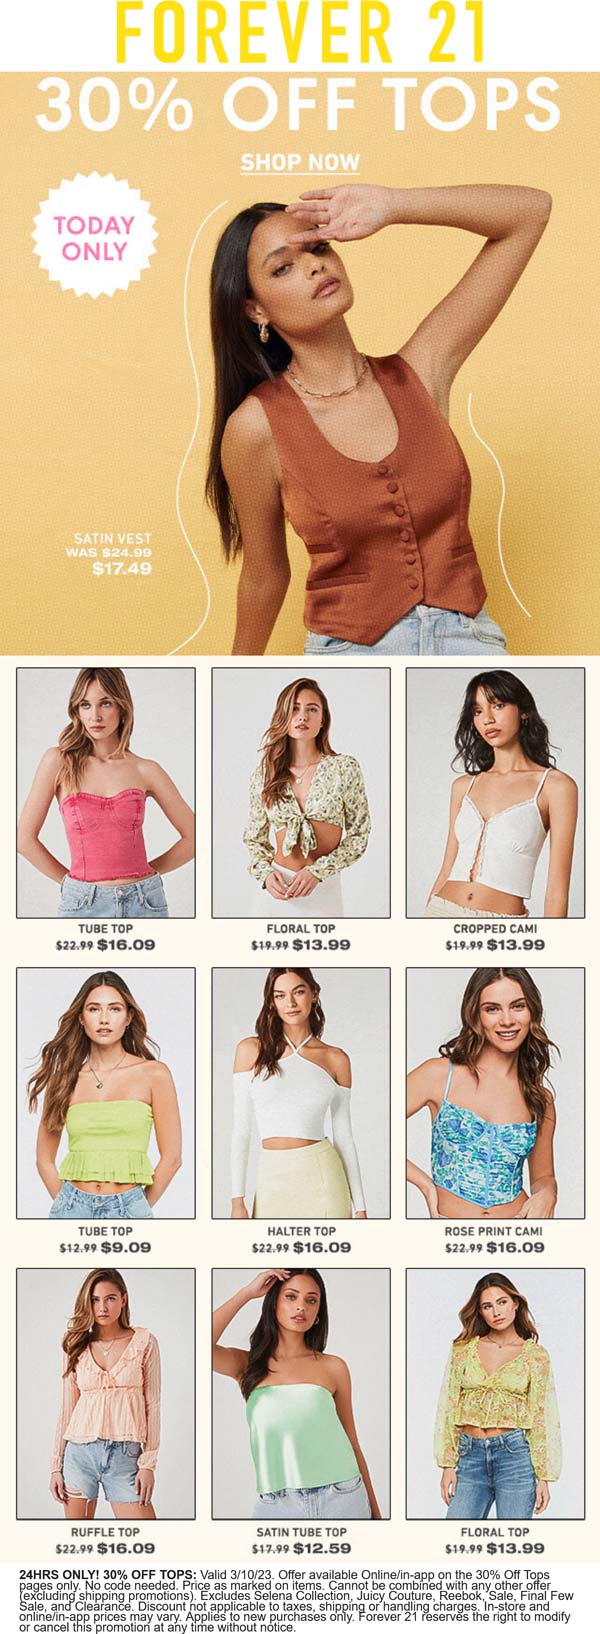 Forever 21 stores Coupon  30% off tops online today at Forever 21 #forever21 